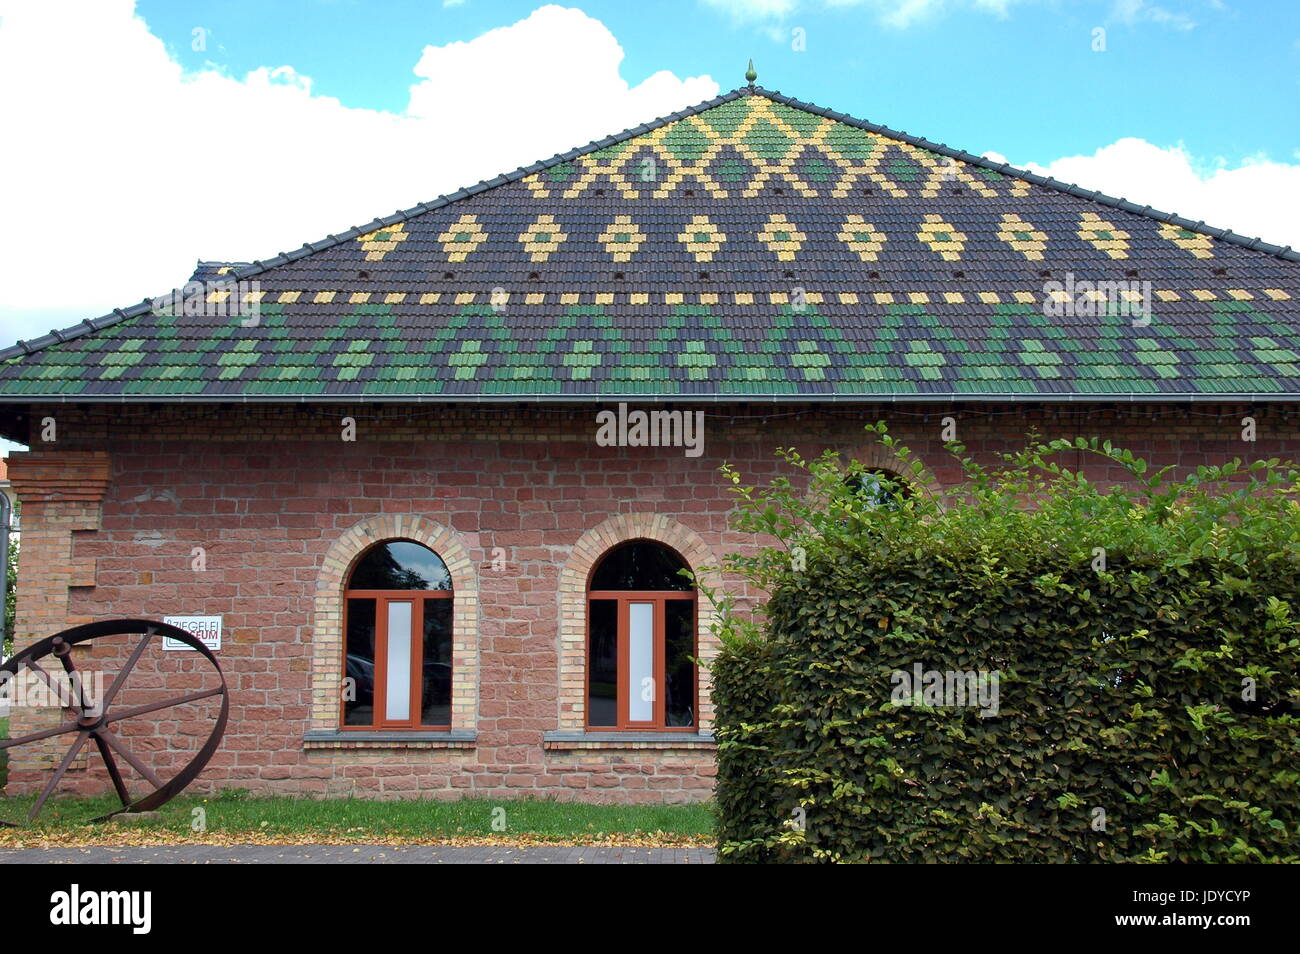 brick building tiled roof Stock Photo